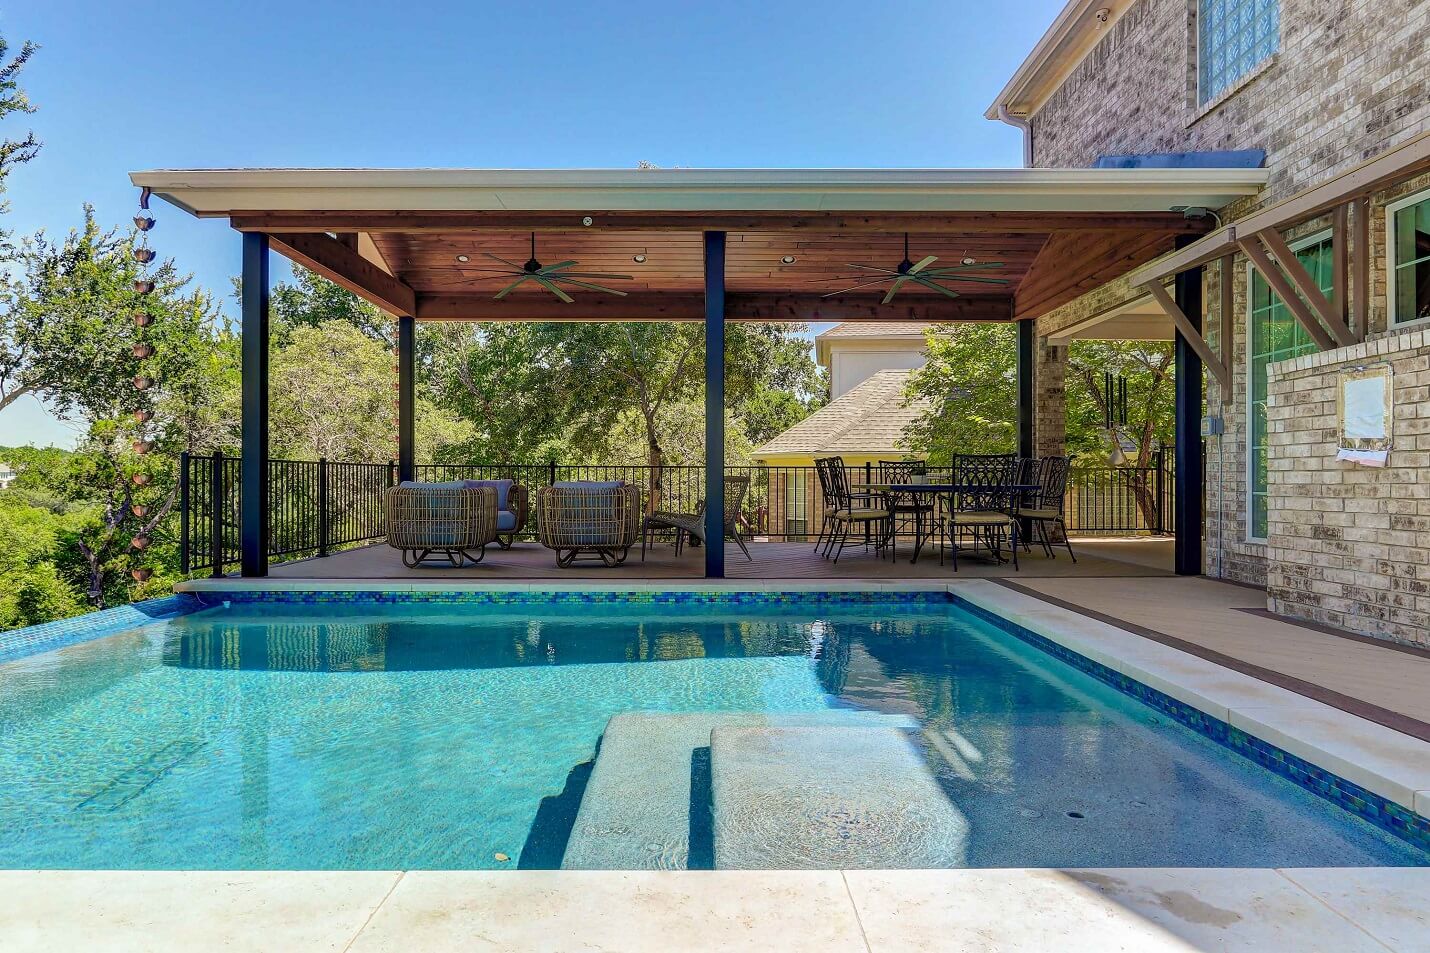 Covered pool deck and swimming pool